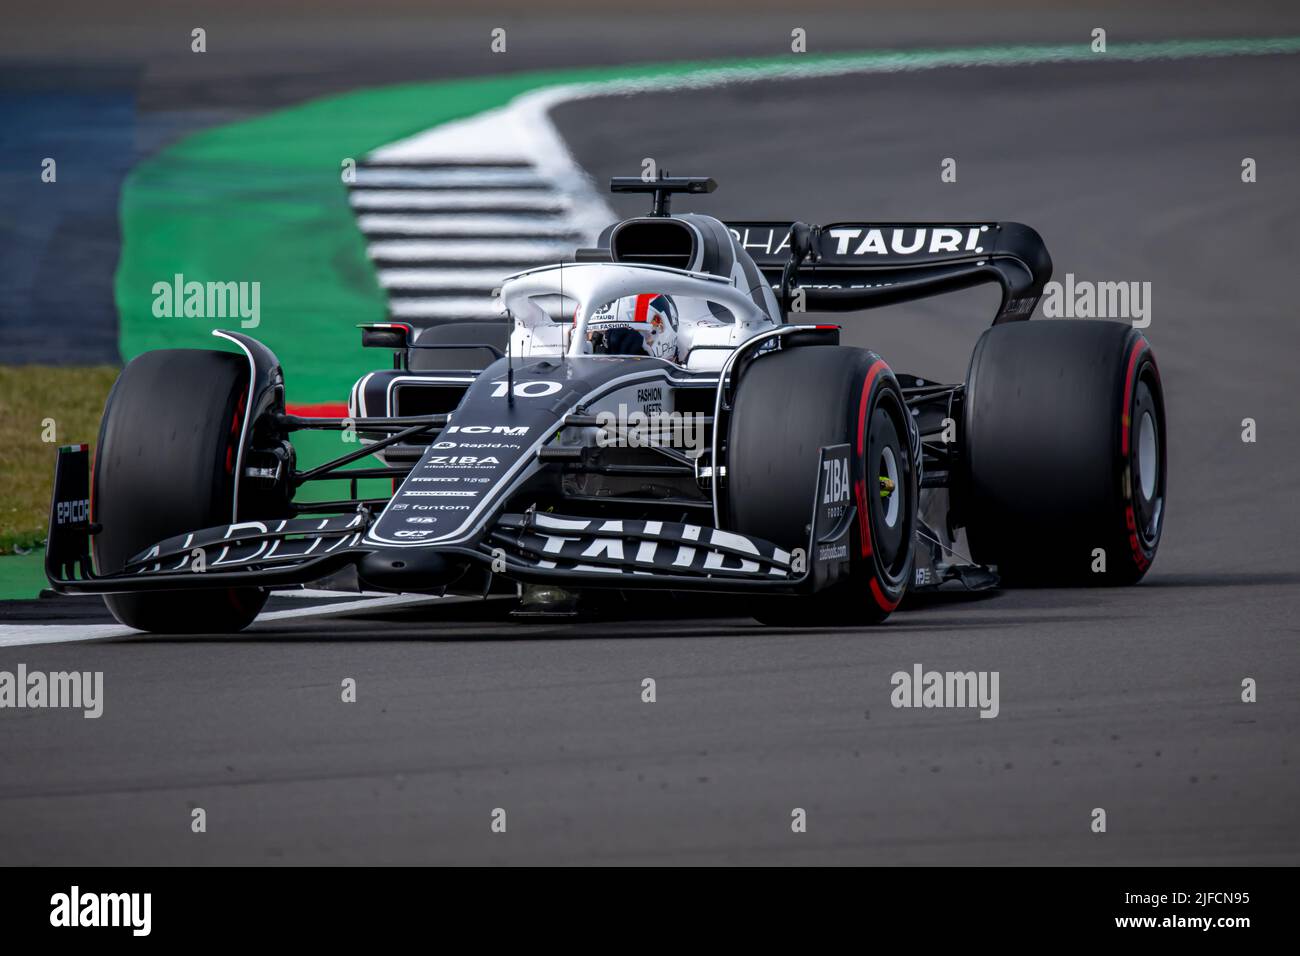 Silverstone, UK, 01st Jul 2022, Pierre Gasly, from France competes for Scuderia AlphaTauri. Practice, round 10 of the 2022 Formula 1 championship. Credit: Michael Potts/Alamy Live News Stock Photo